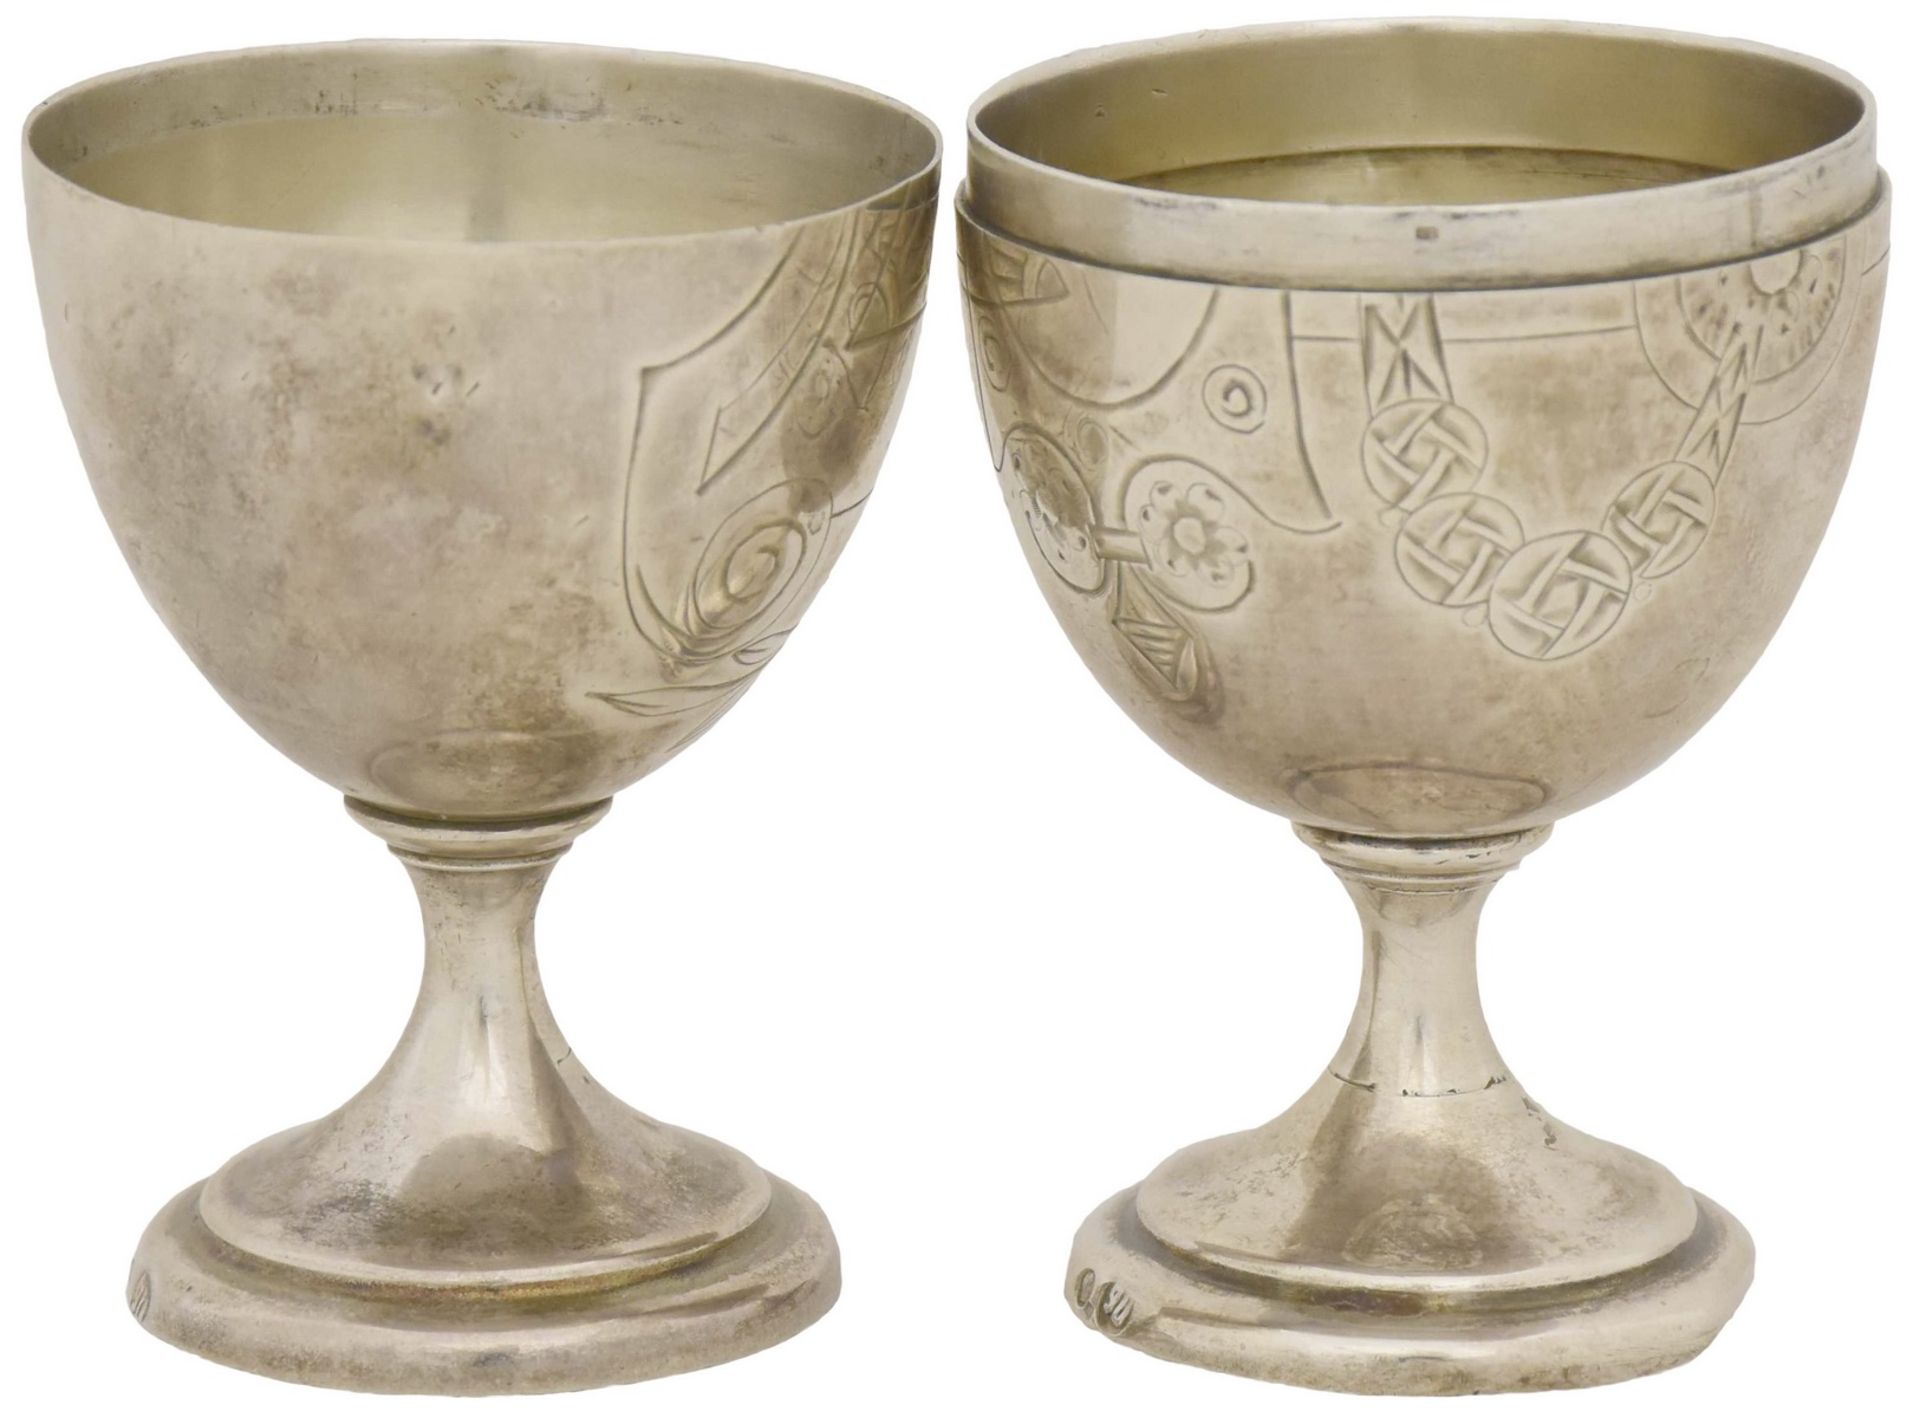 [Russian]. A pair of silver egg bowls, art-nouveau. - Russia, 20th cent. - 4,5x12 cm; 74 g. - Image 2 of 4